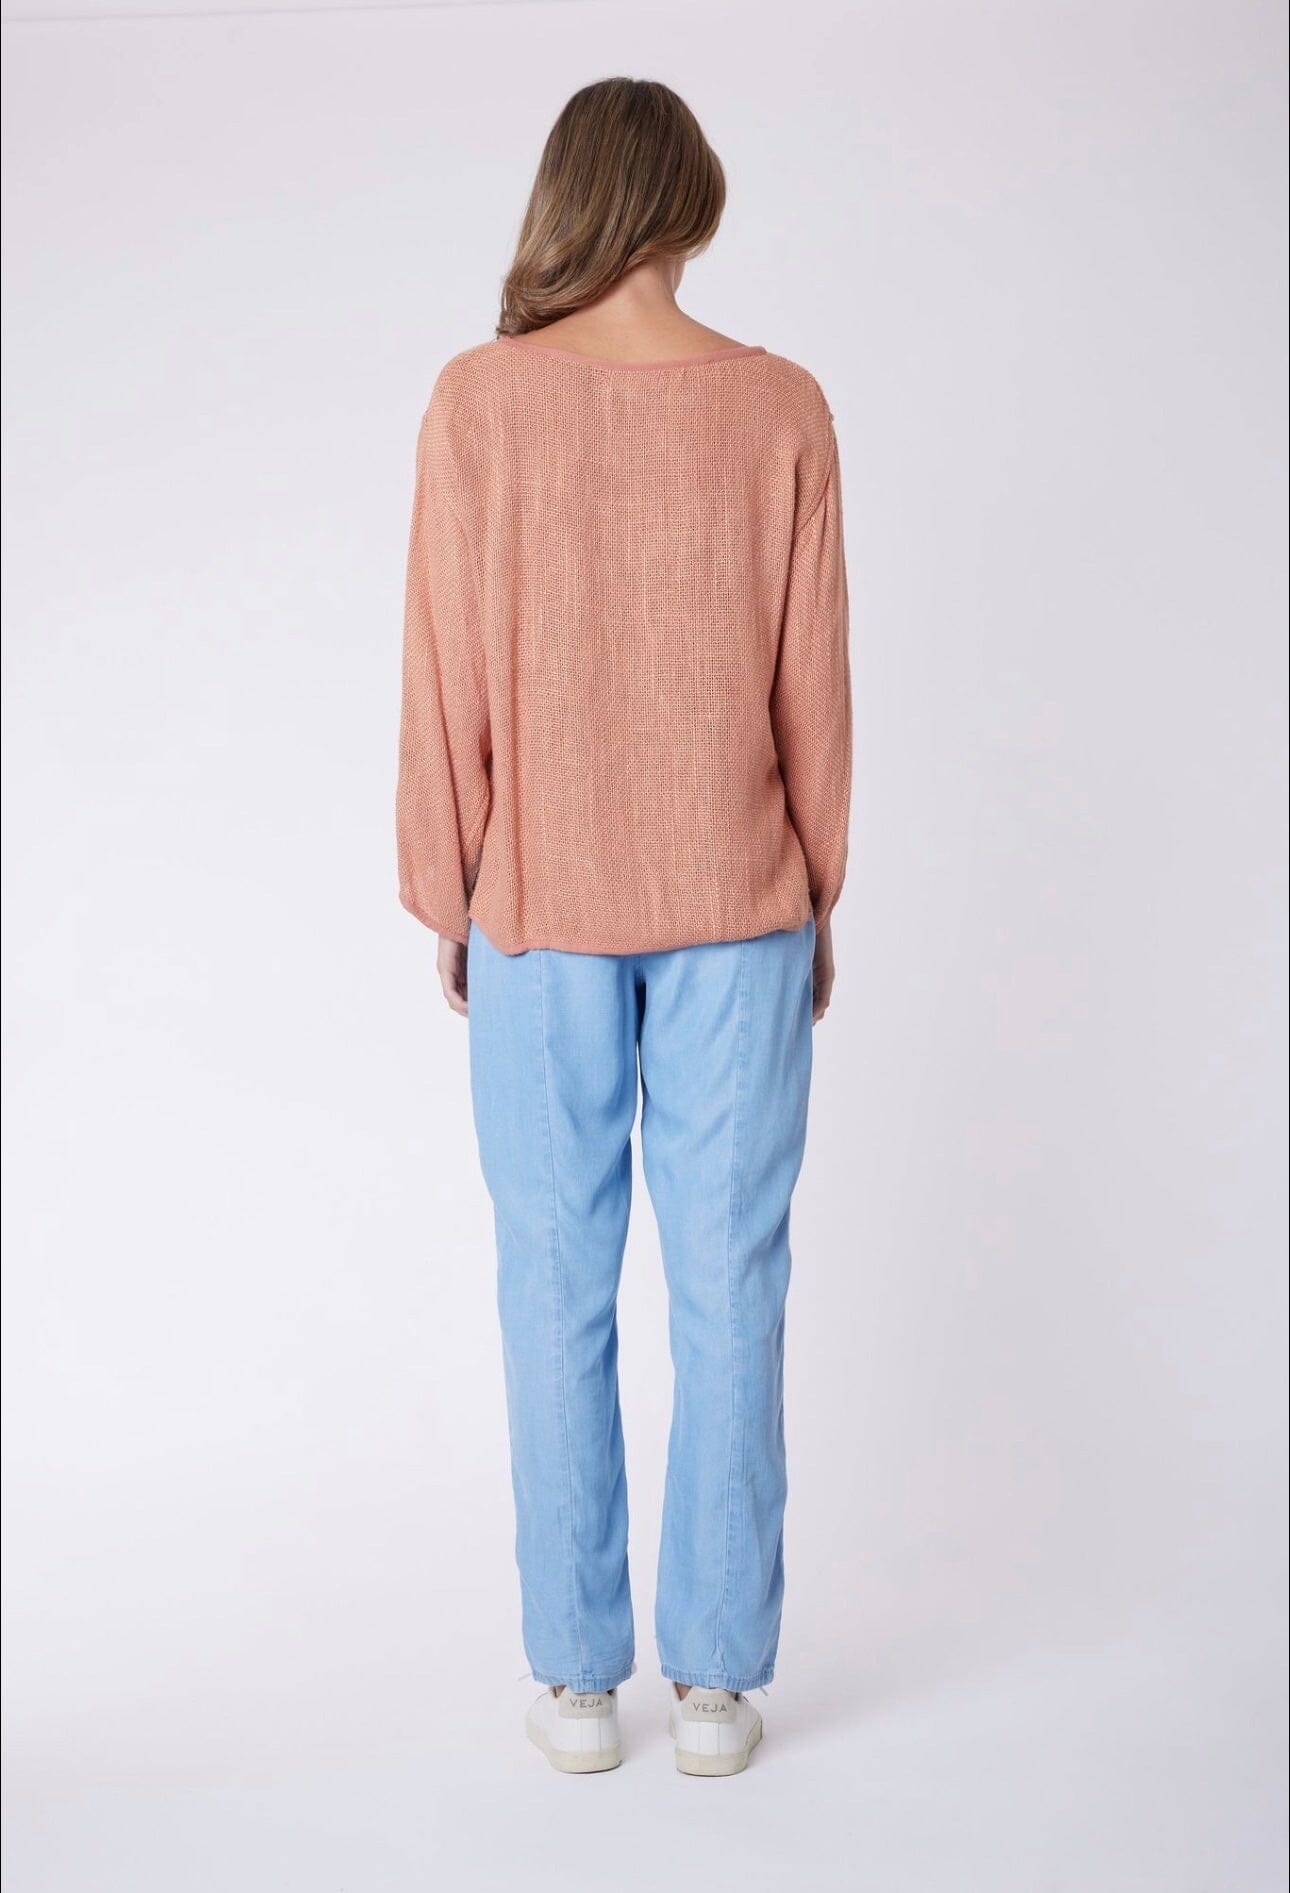 Nadia Hessian Top - Blush Carbon the Label 